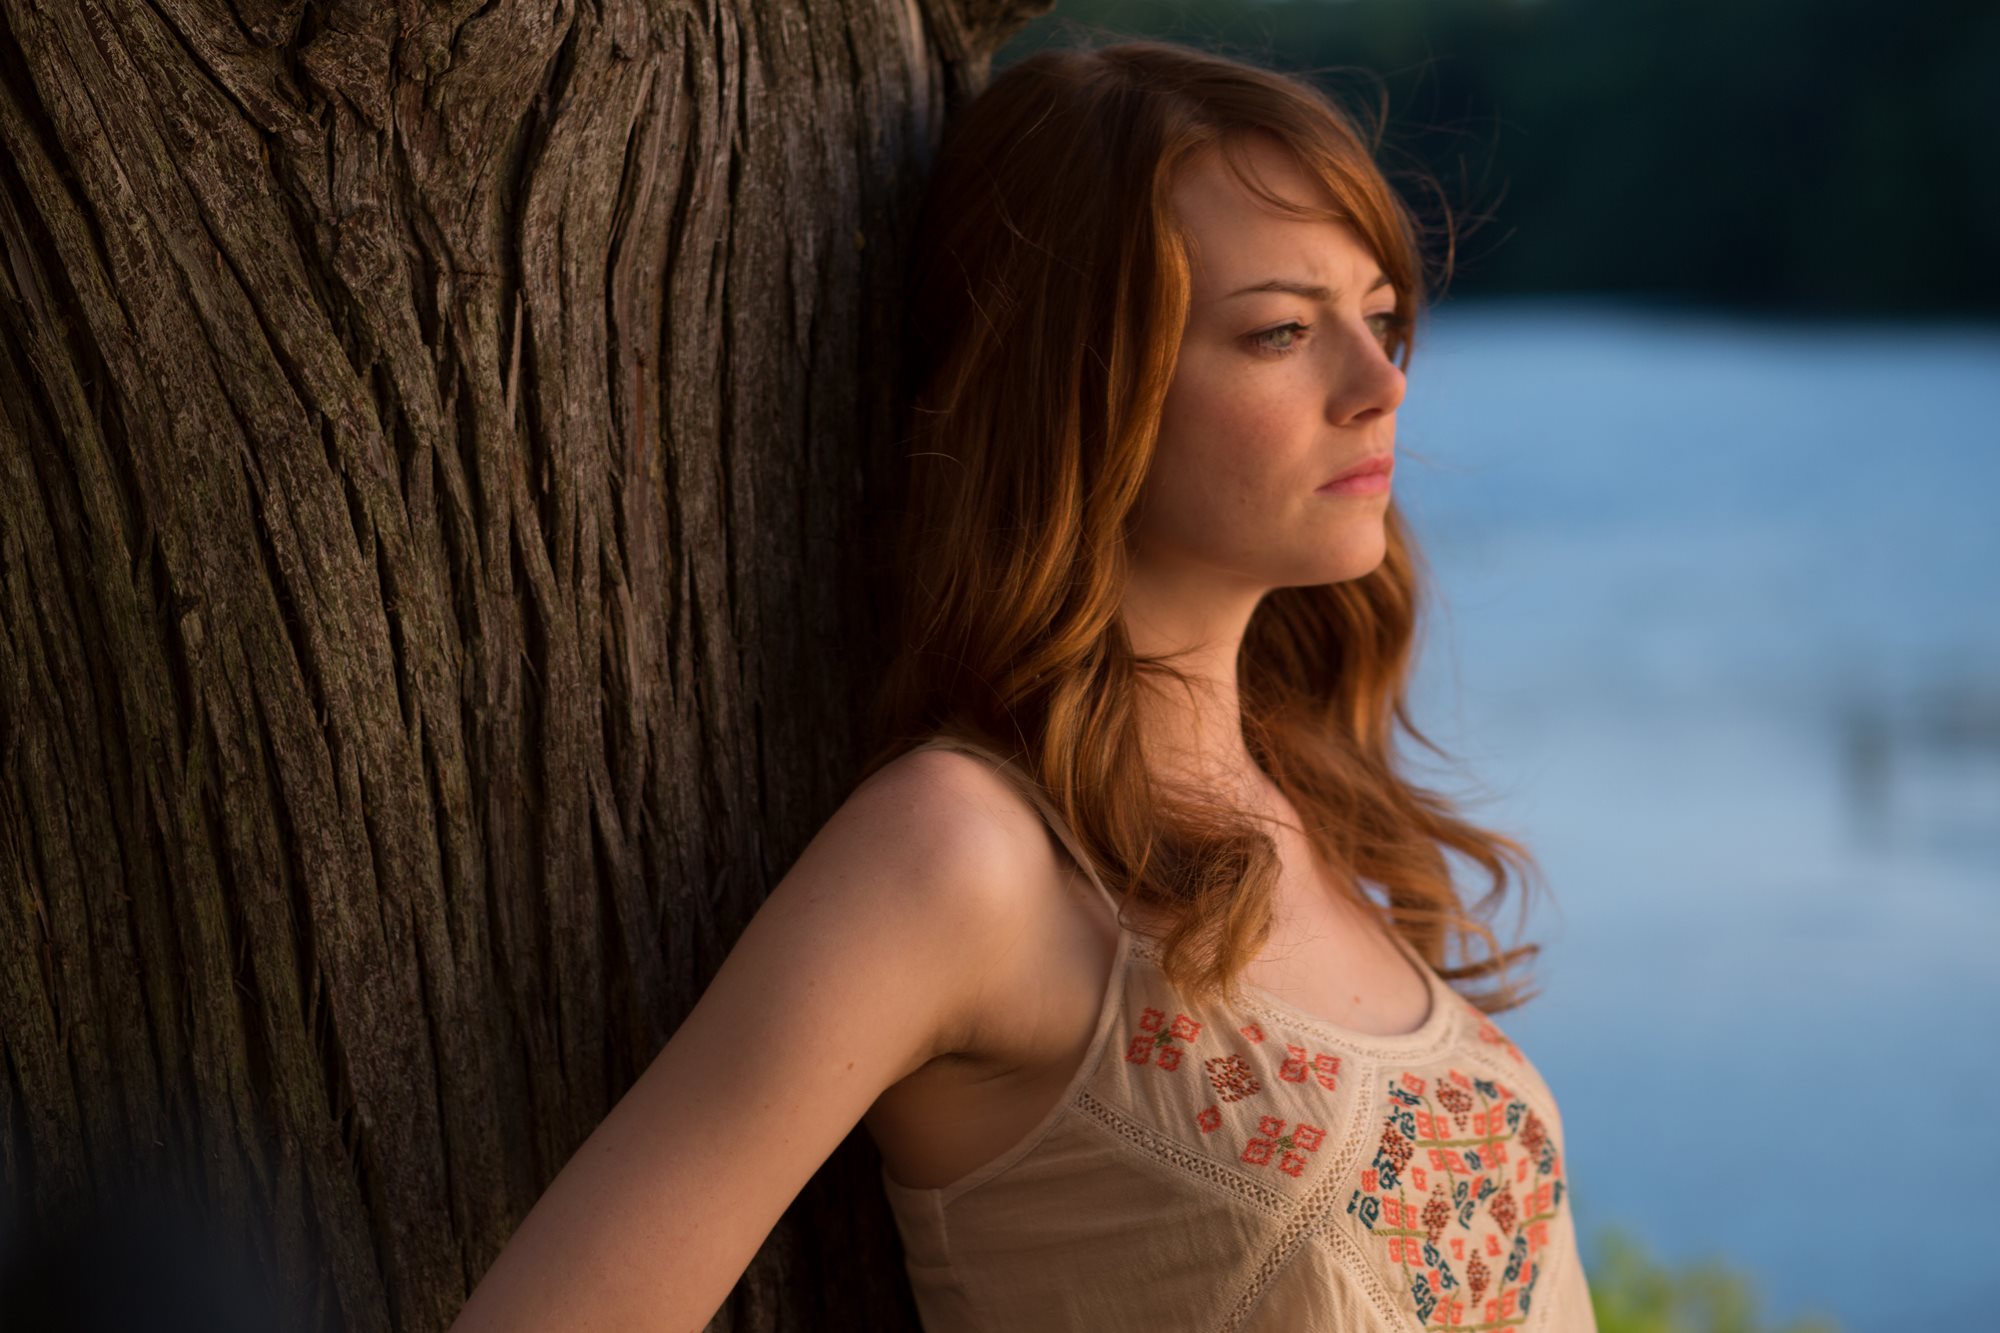 Movie Irrational Man HD Wallpaper | Background Image